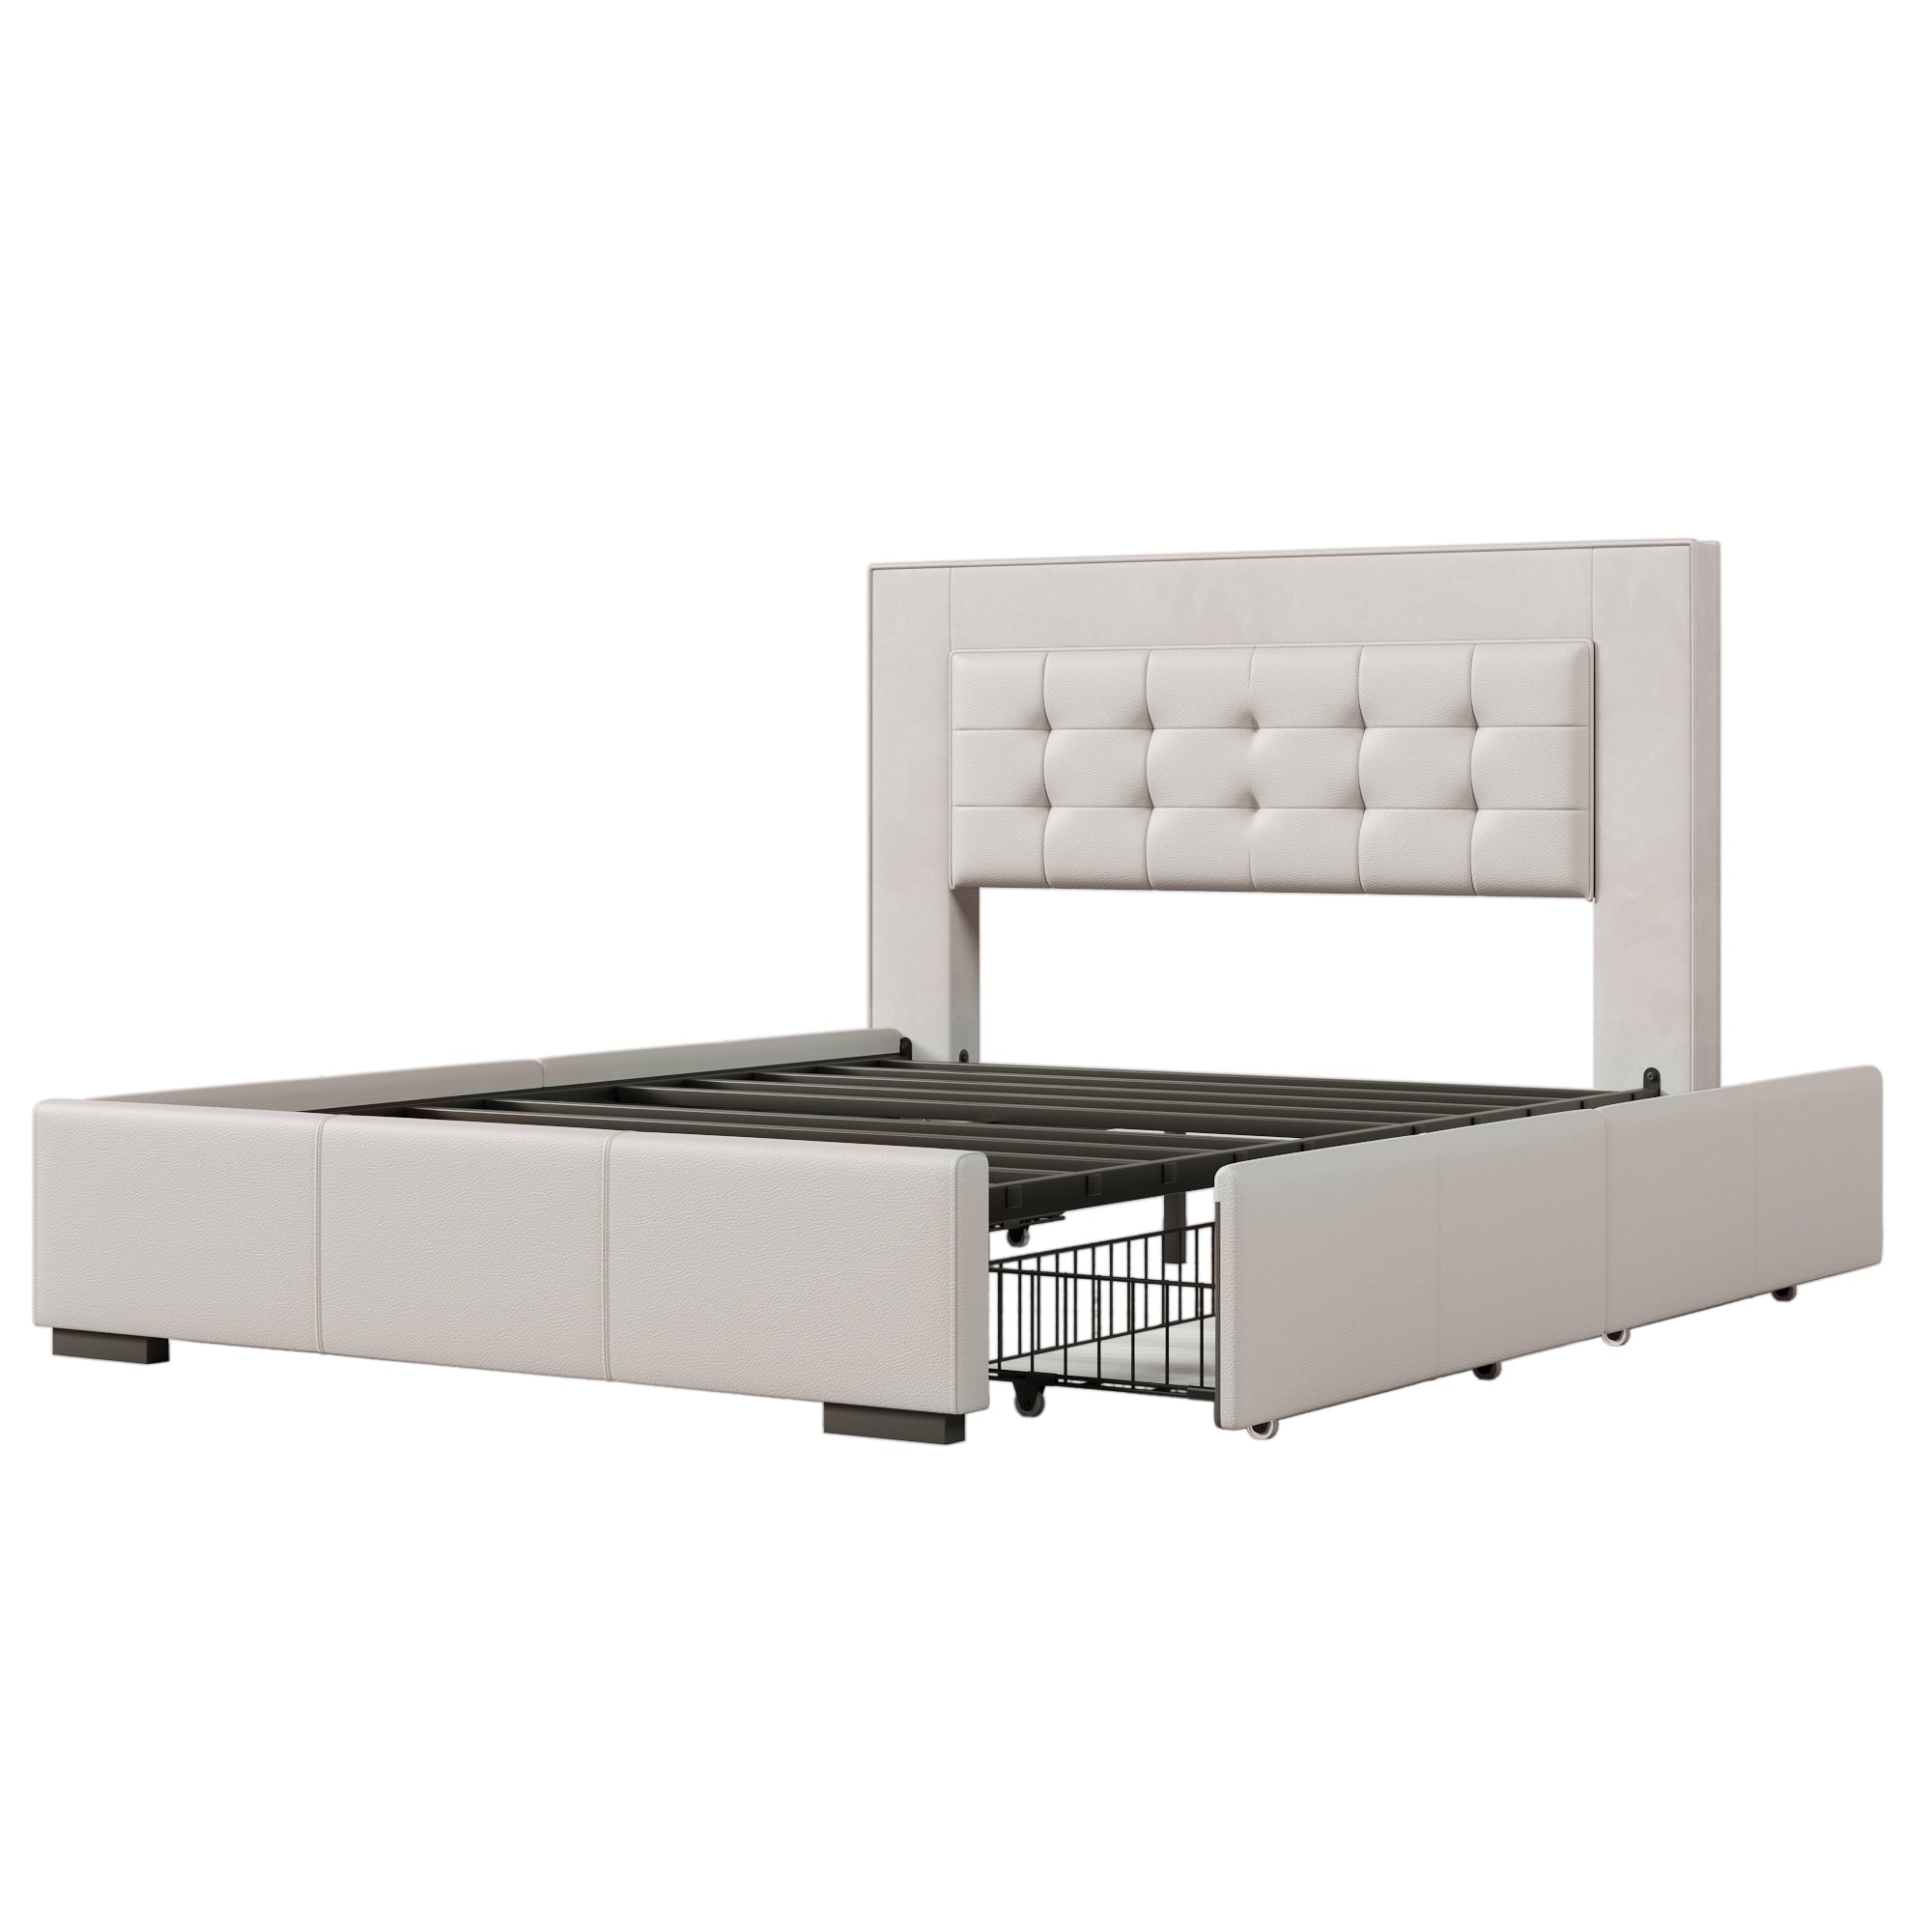 Upholstered Queen Platform Bed Frame with Four Drawers